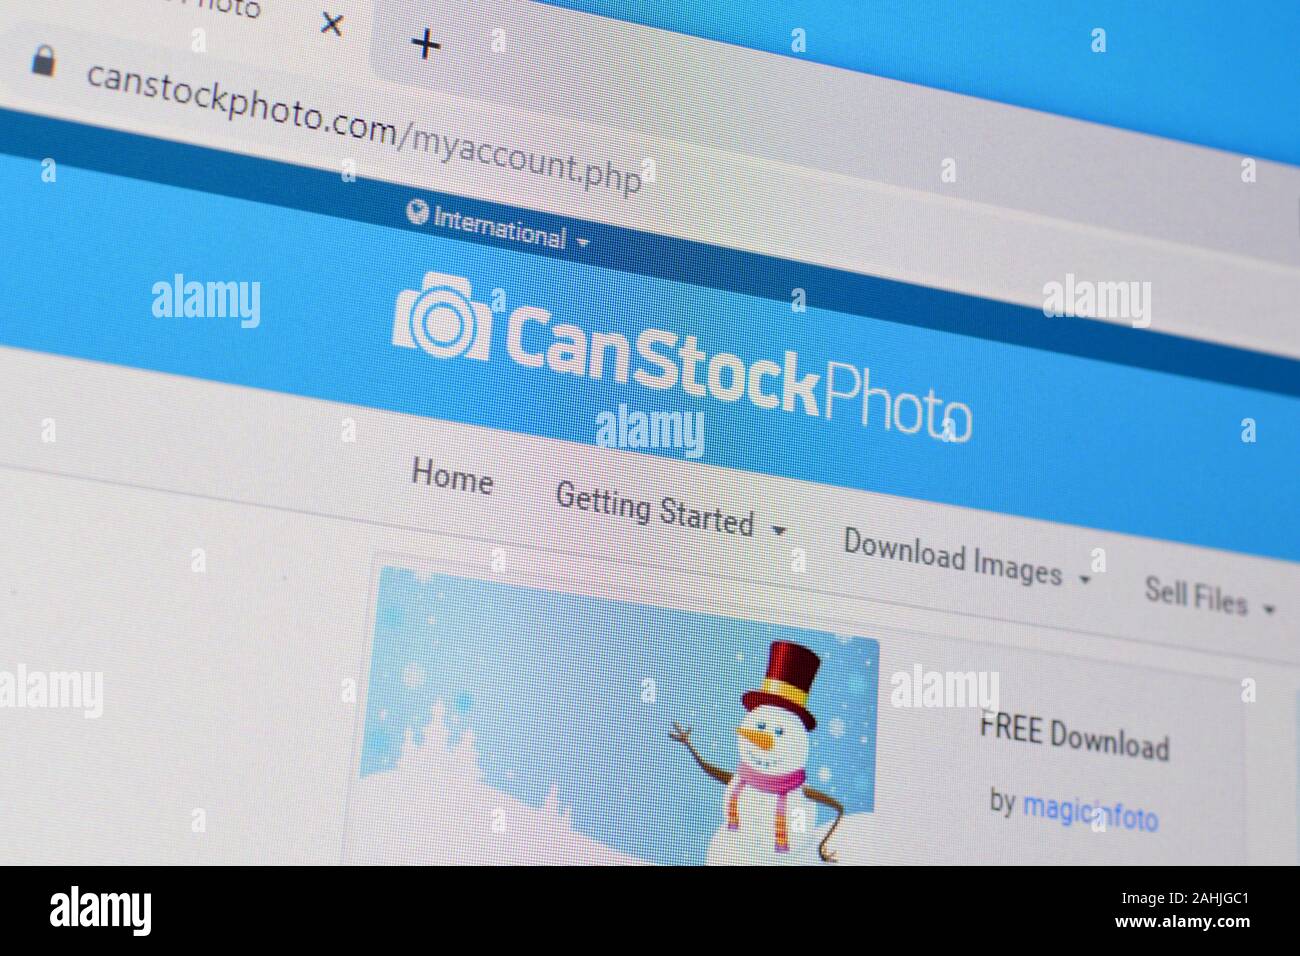 Canstockphoto Clipart Illustrations